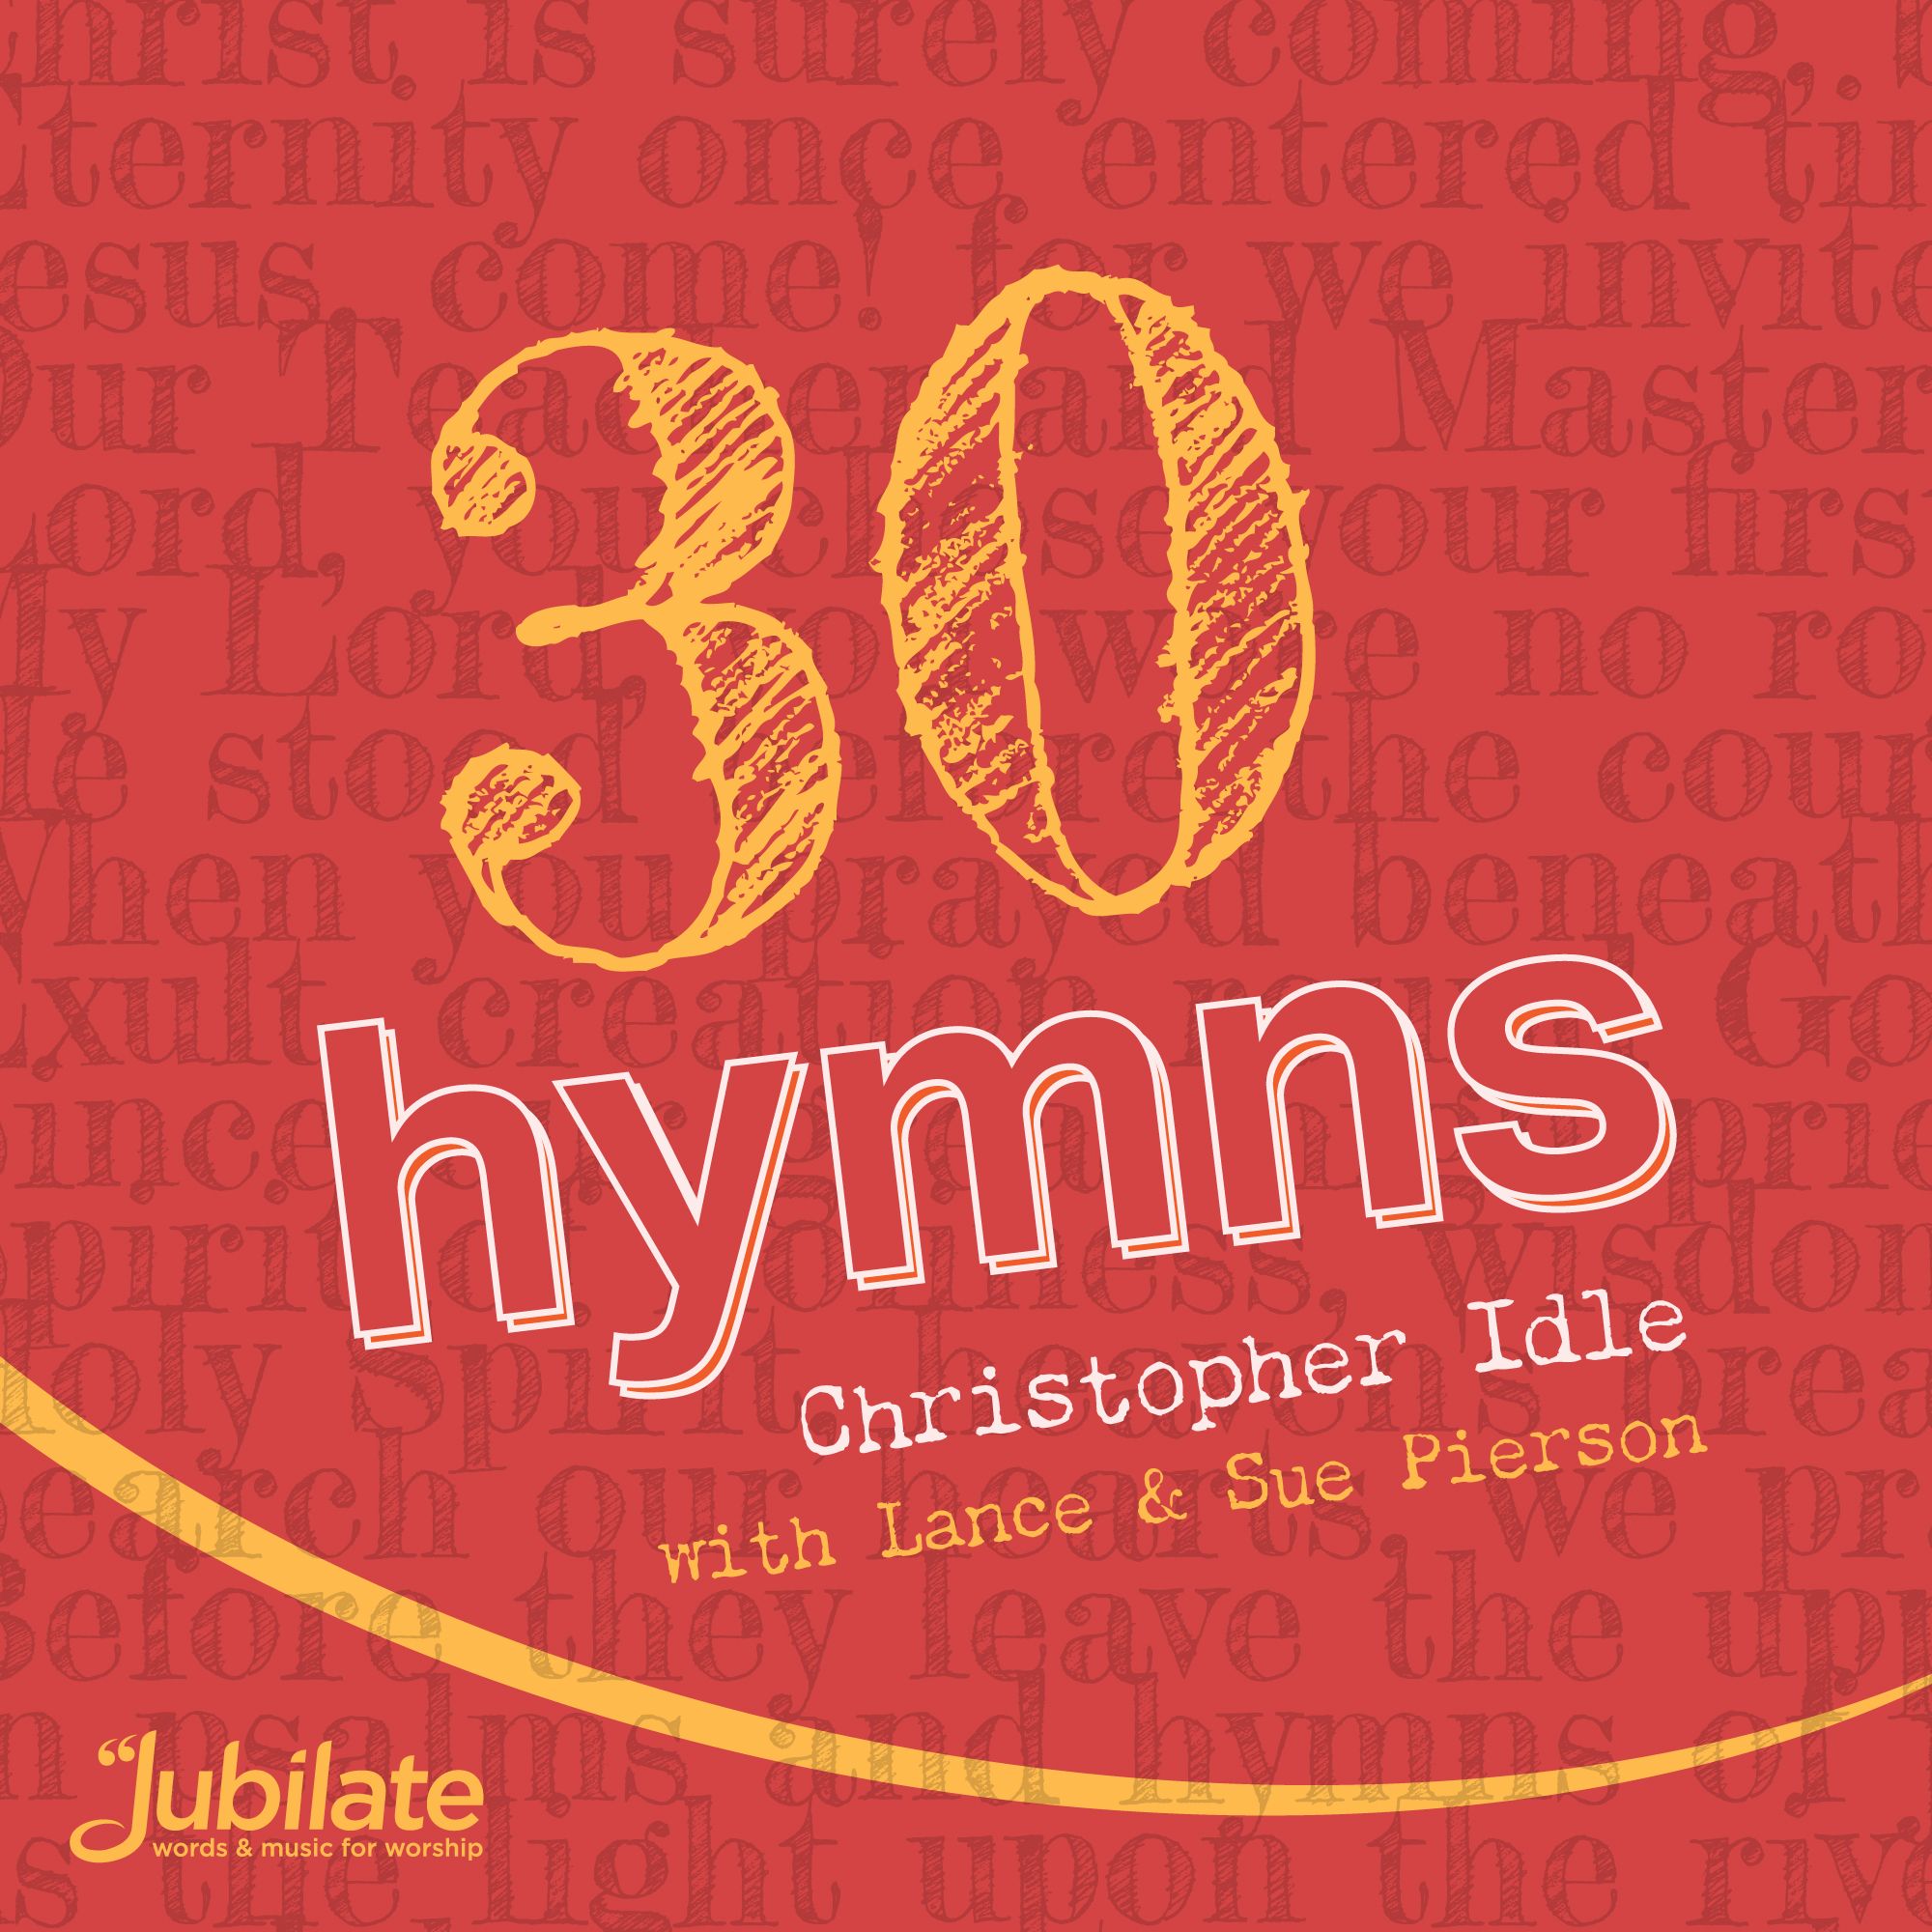 Logo for 30 Hymns: Christopher Idle with Lance & Sue Pierson